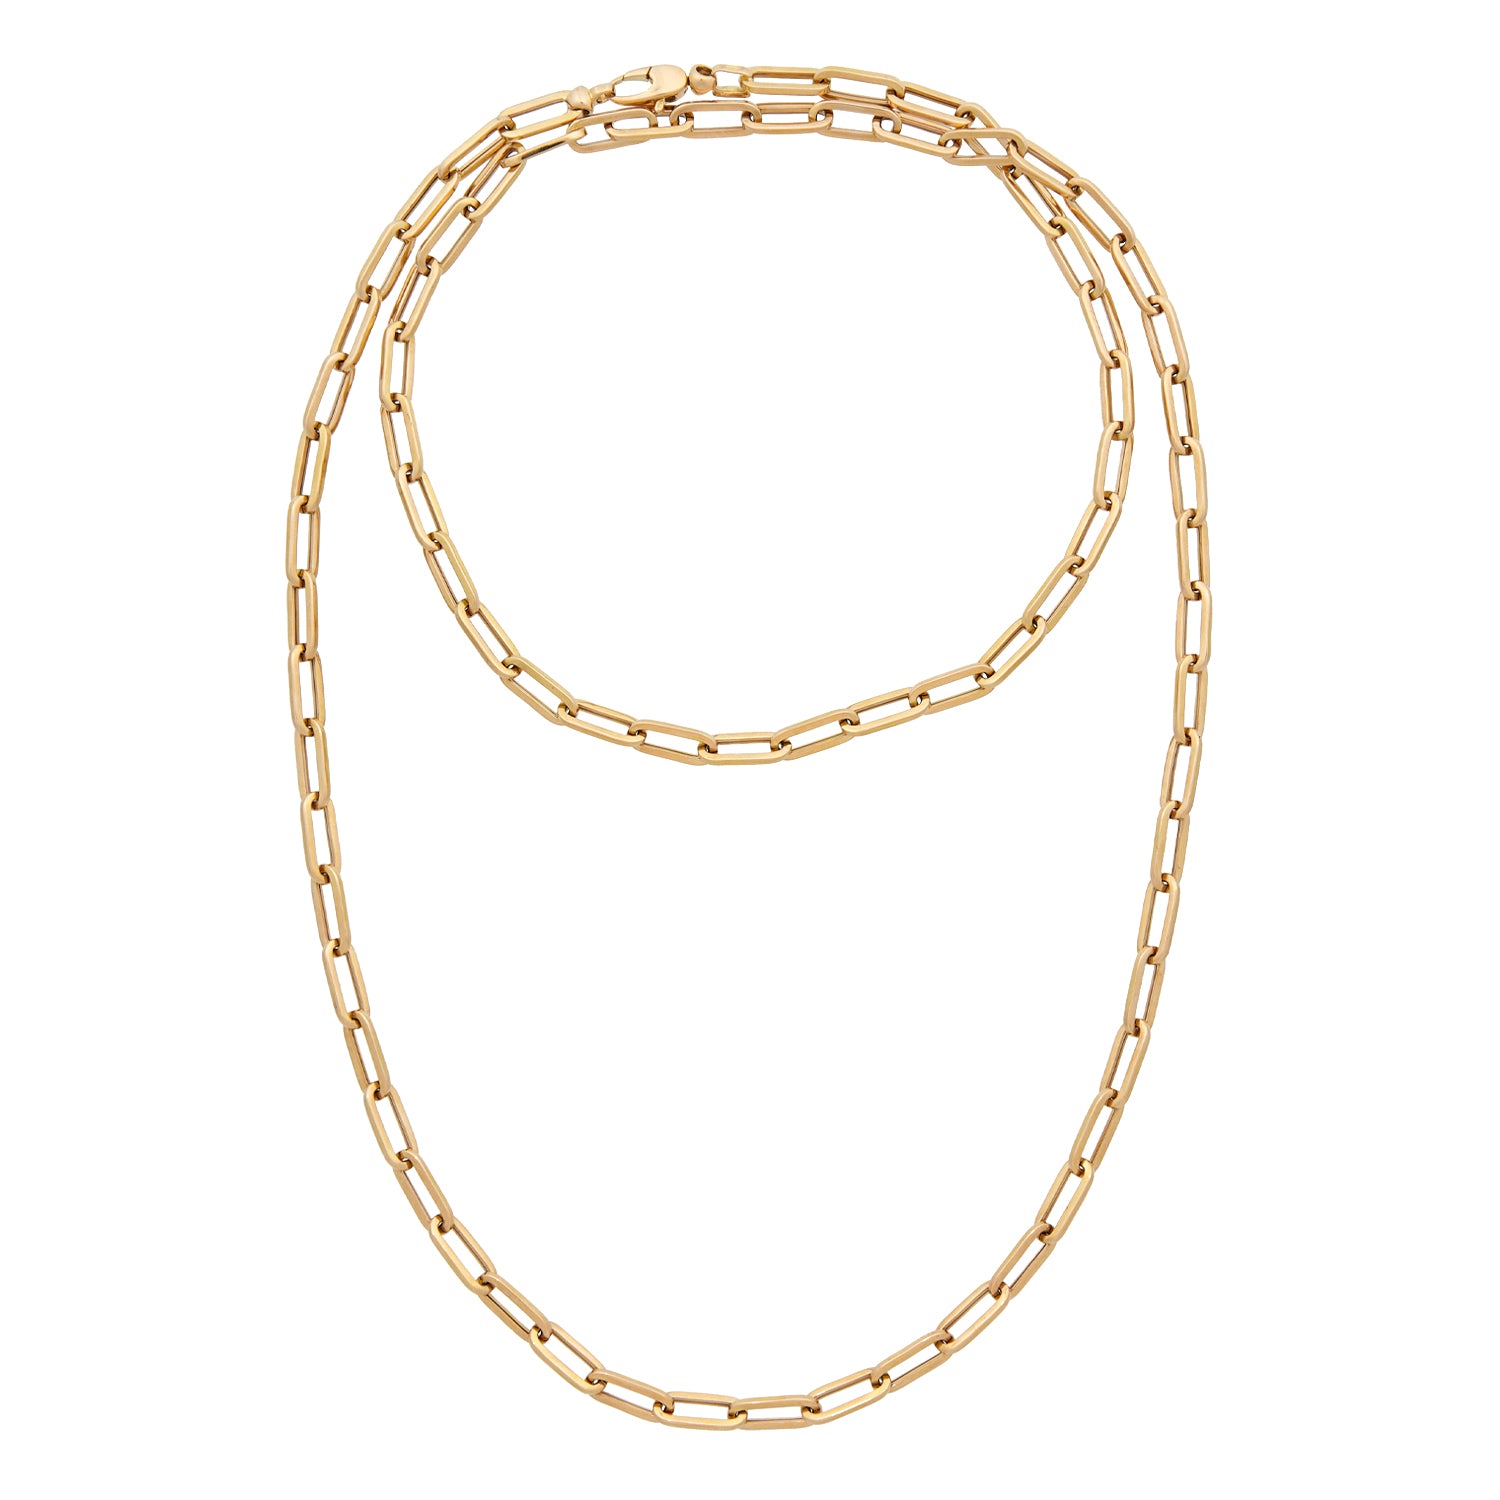 Rose gold paperclip necklace, long